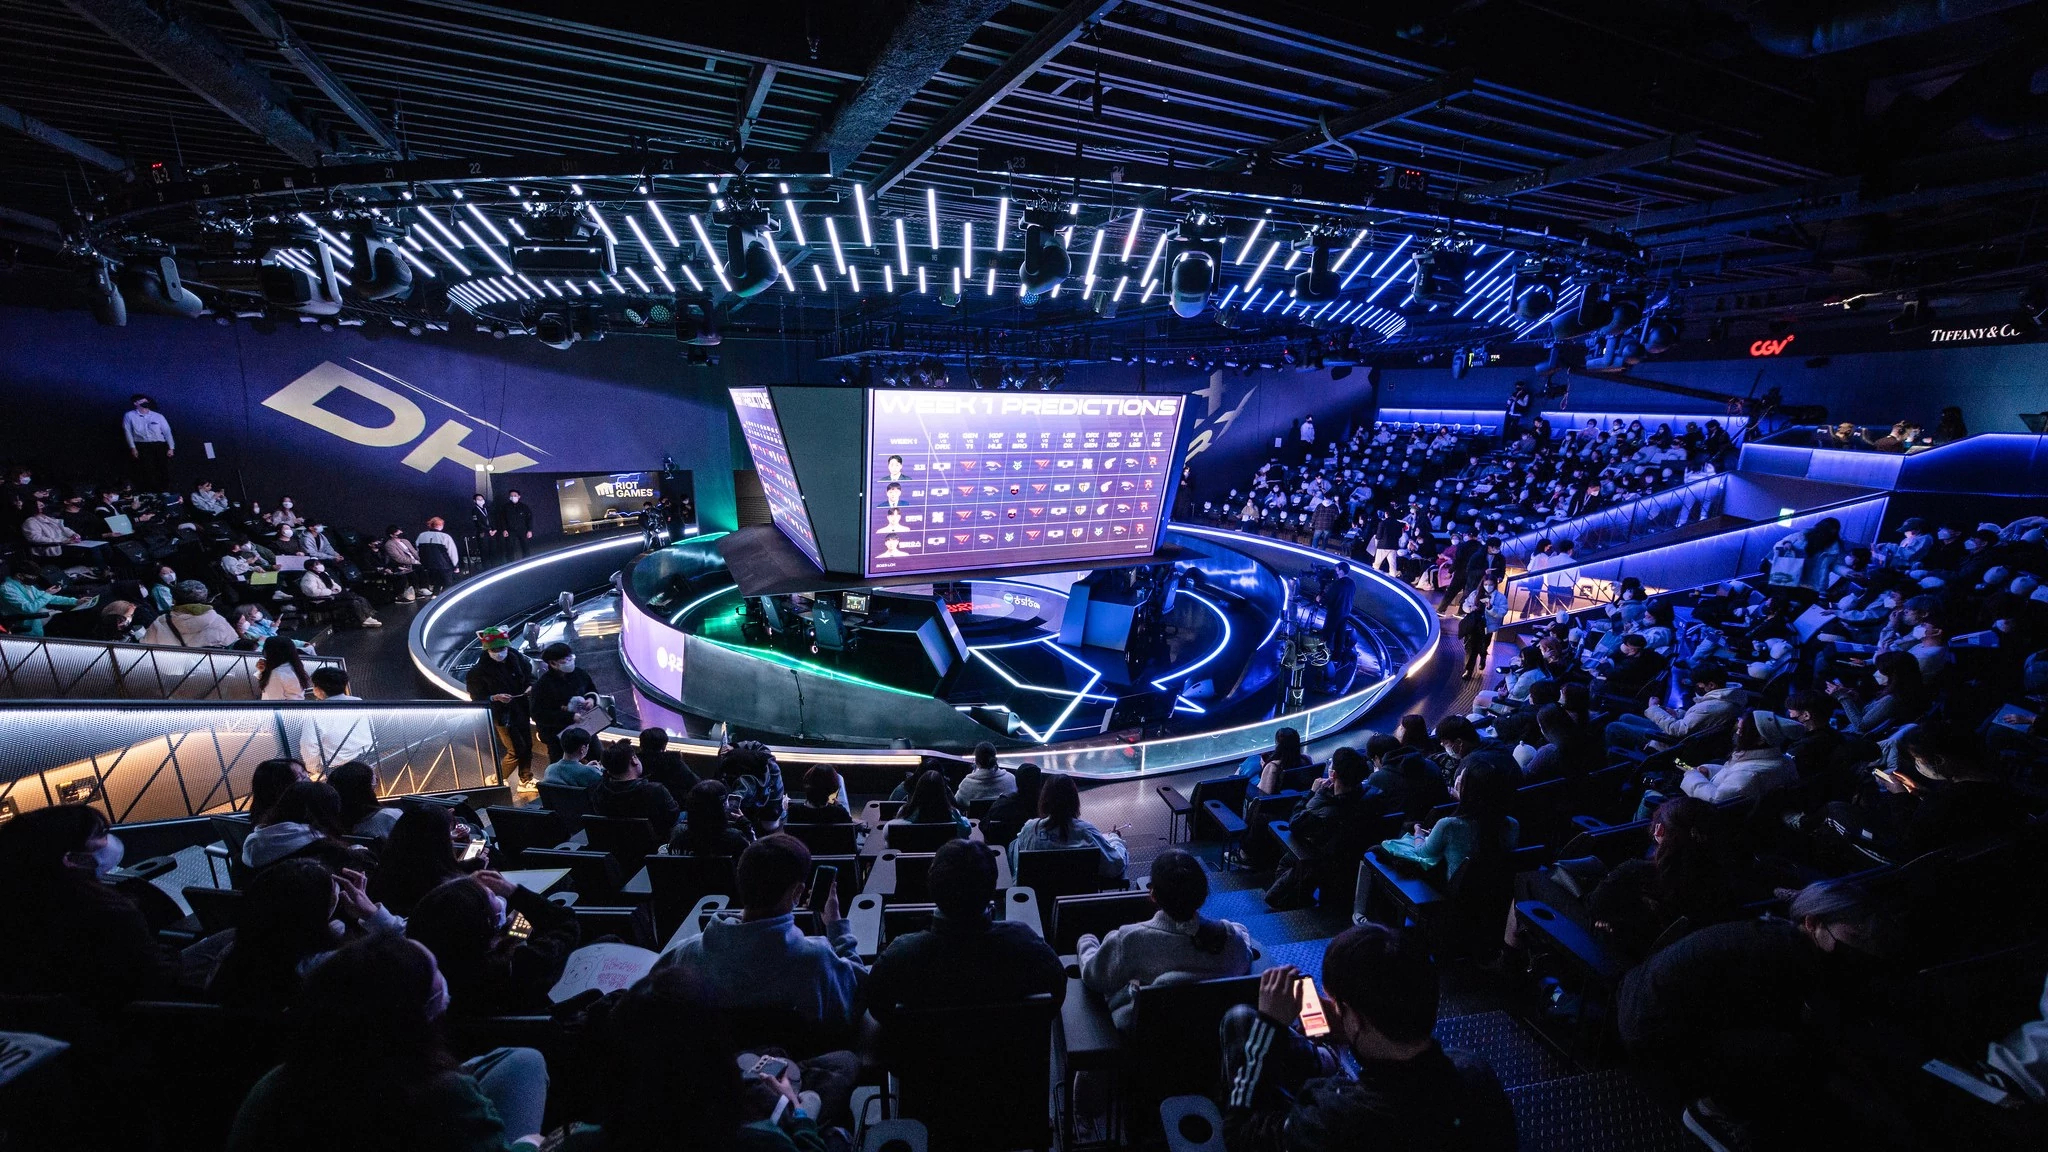 LCK reportedly set to implement salary cap within the league